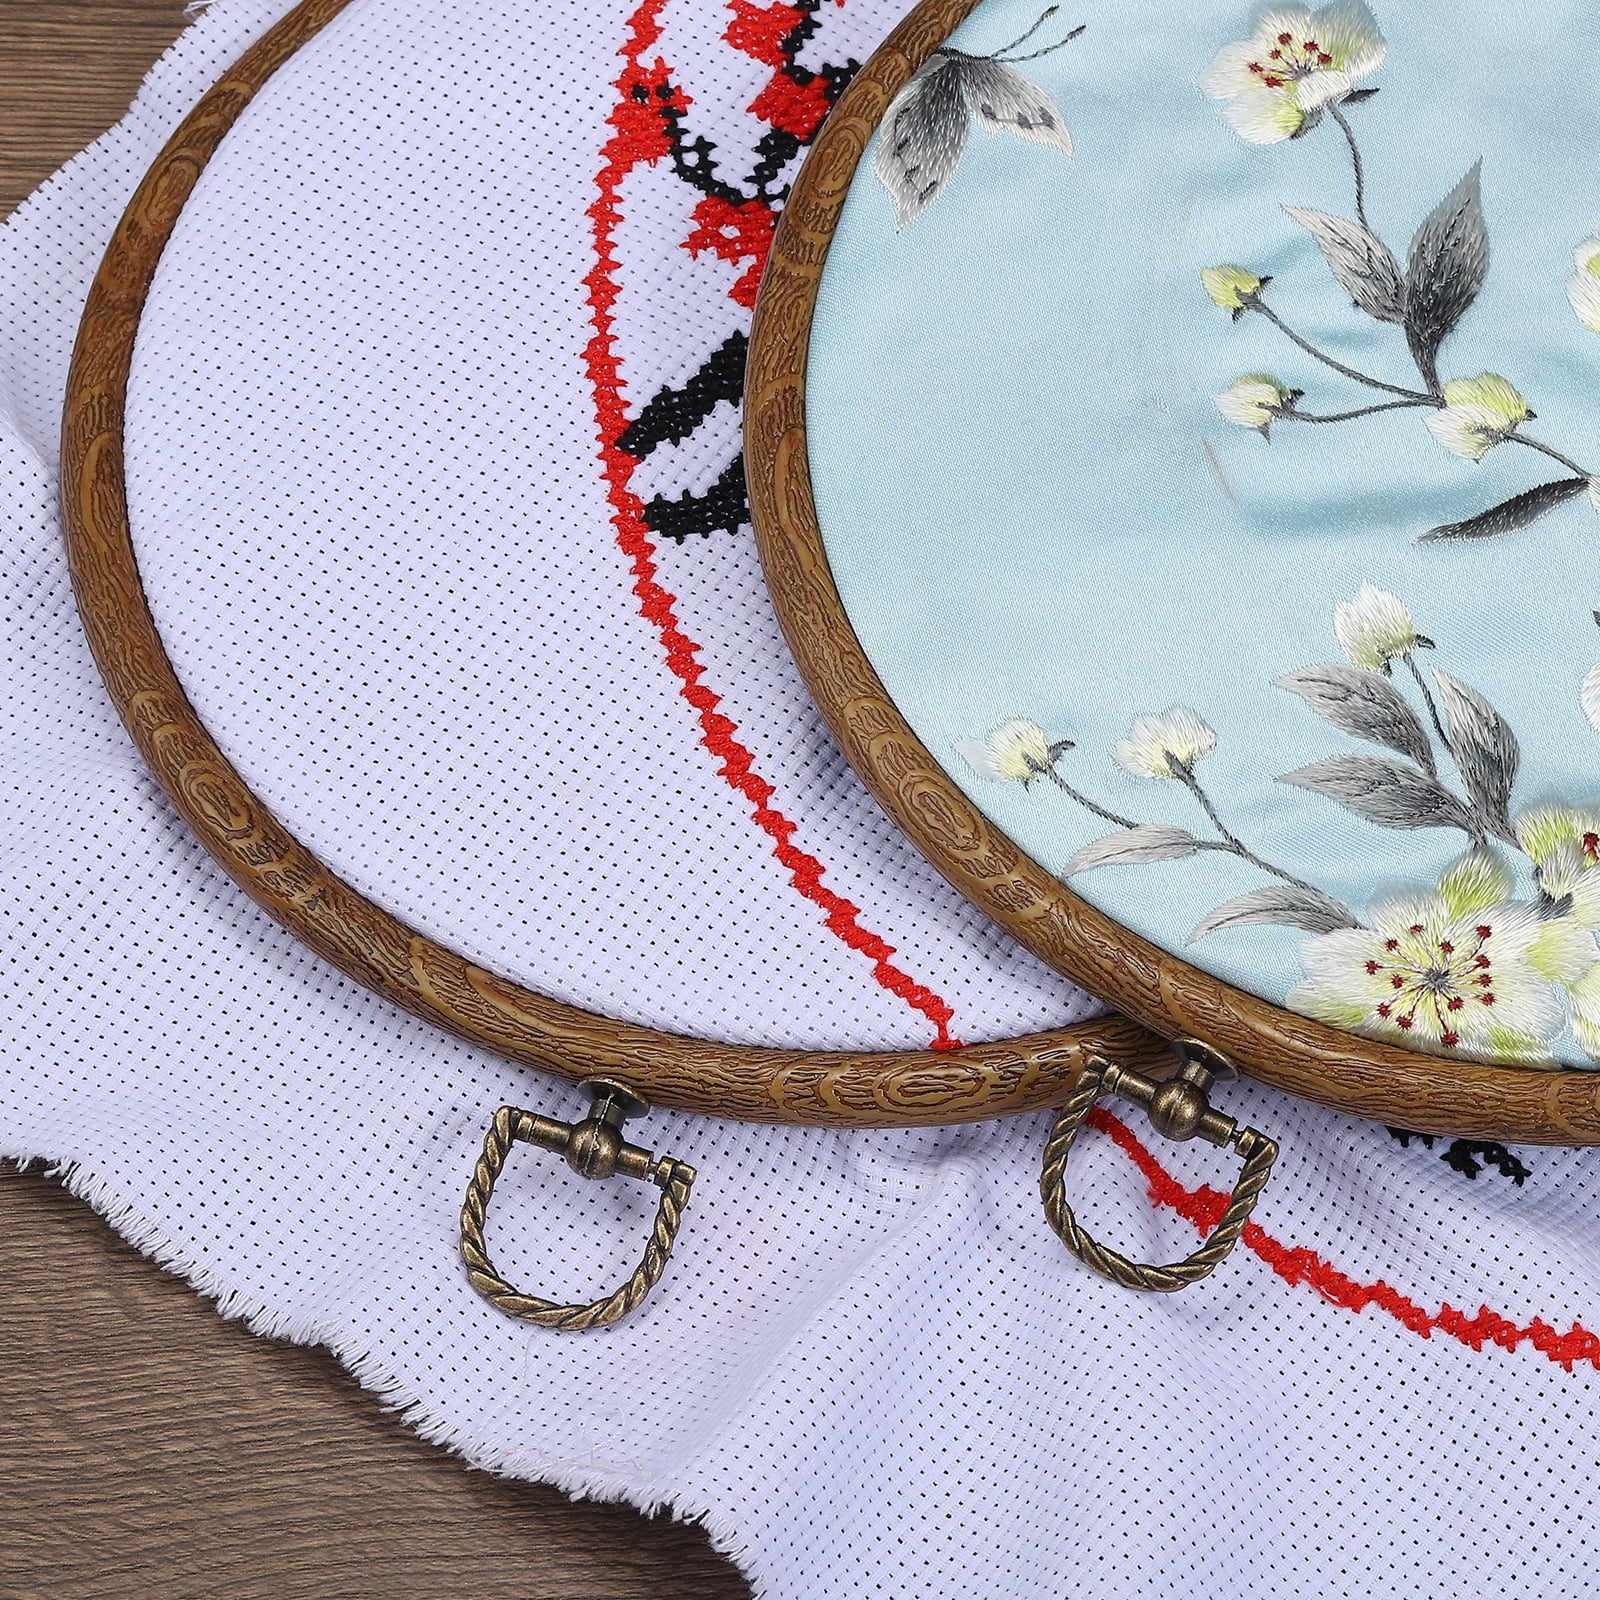 OVAL Wooden Embroidery Hoop for Cross Stitch, 5 X 9 or 3.5 X 5